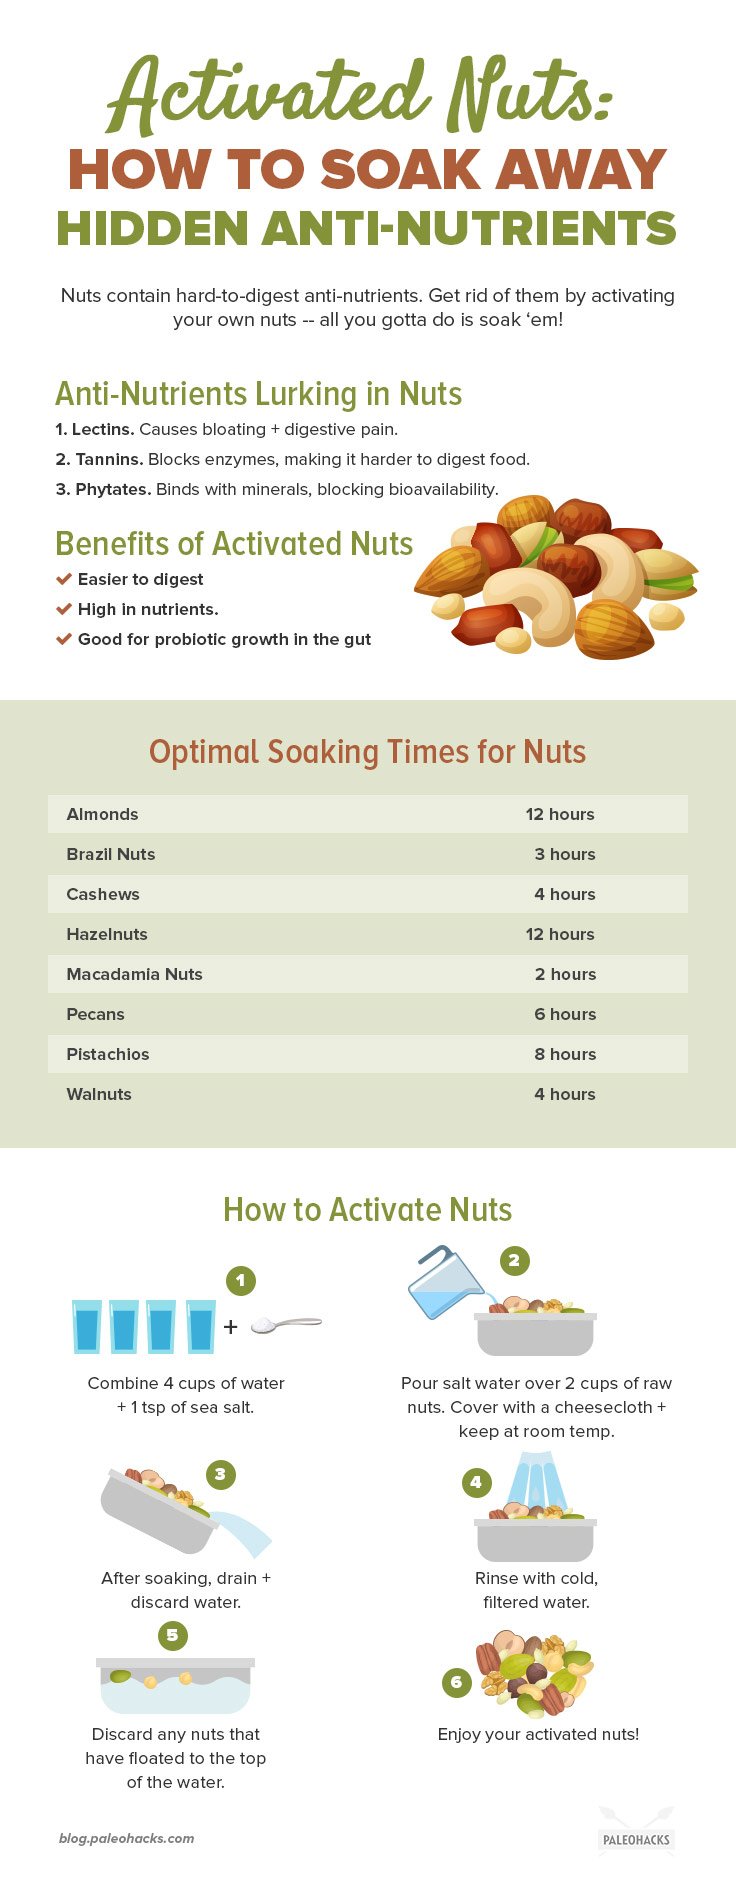 If you ever feel bloated after eating nuts, that’s because they contain some hard-to-digest particles.